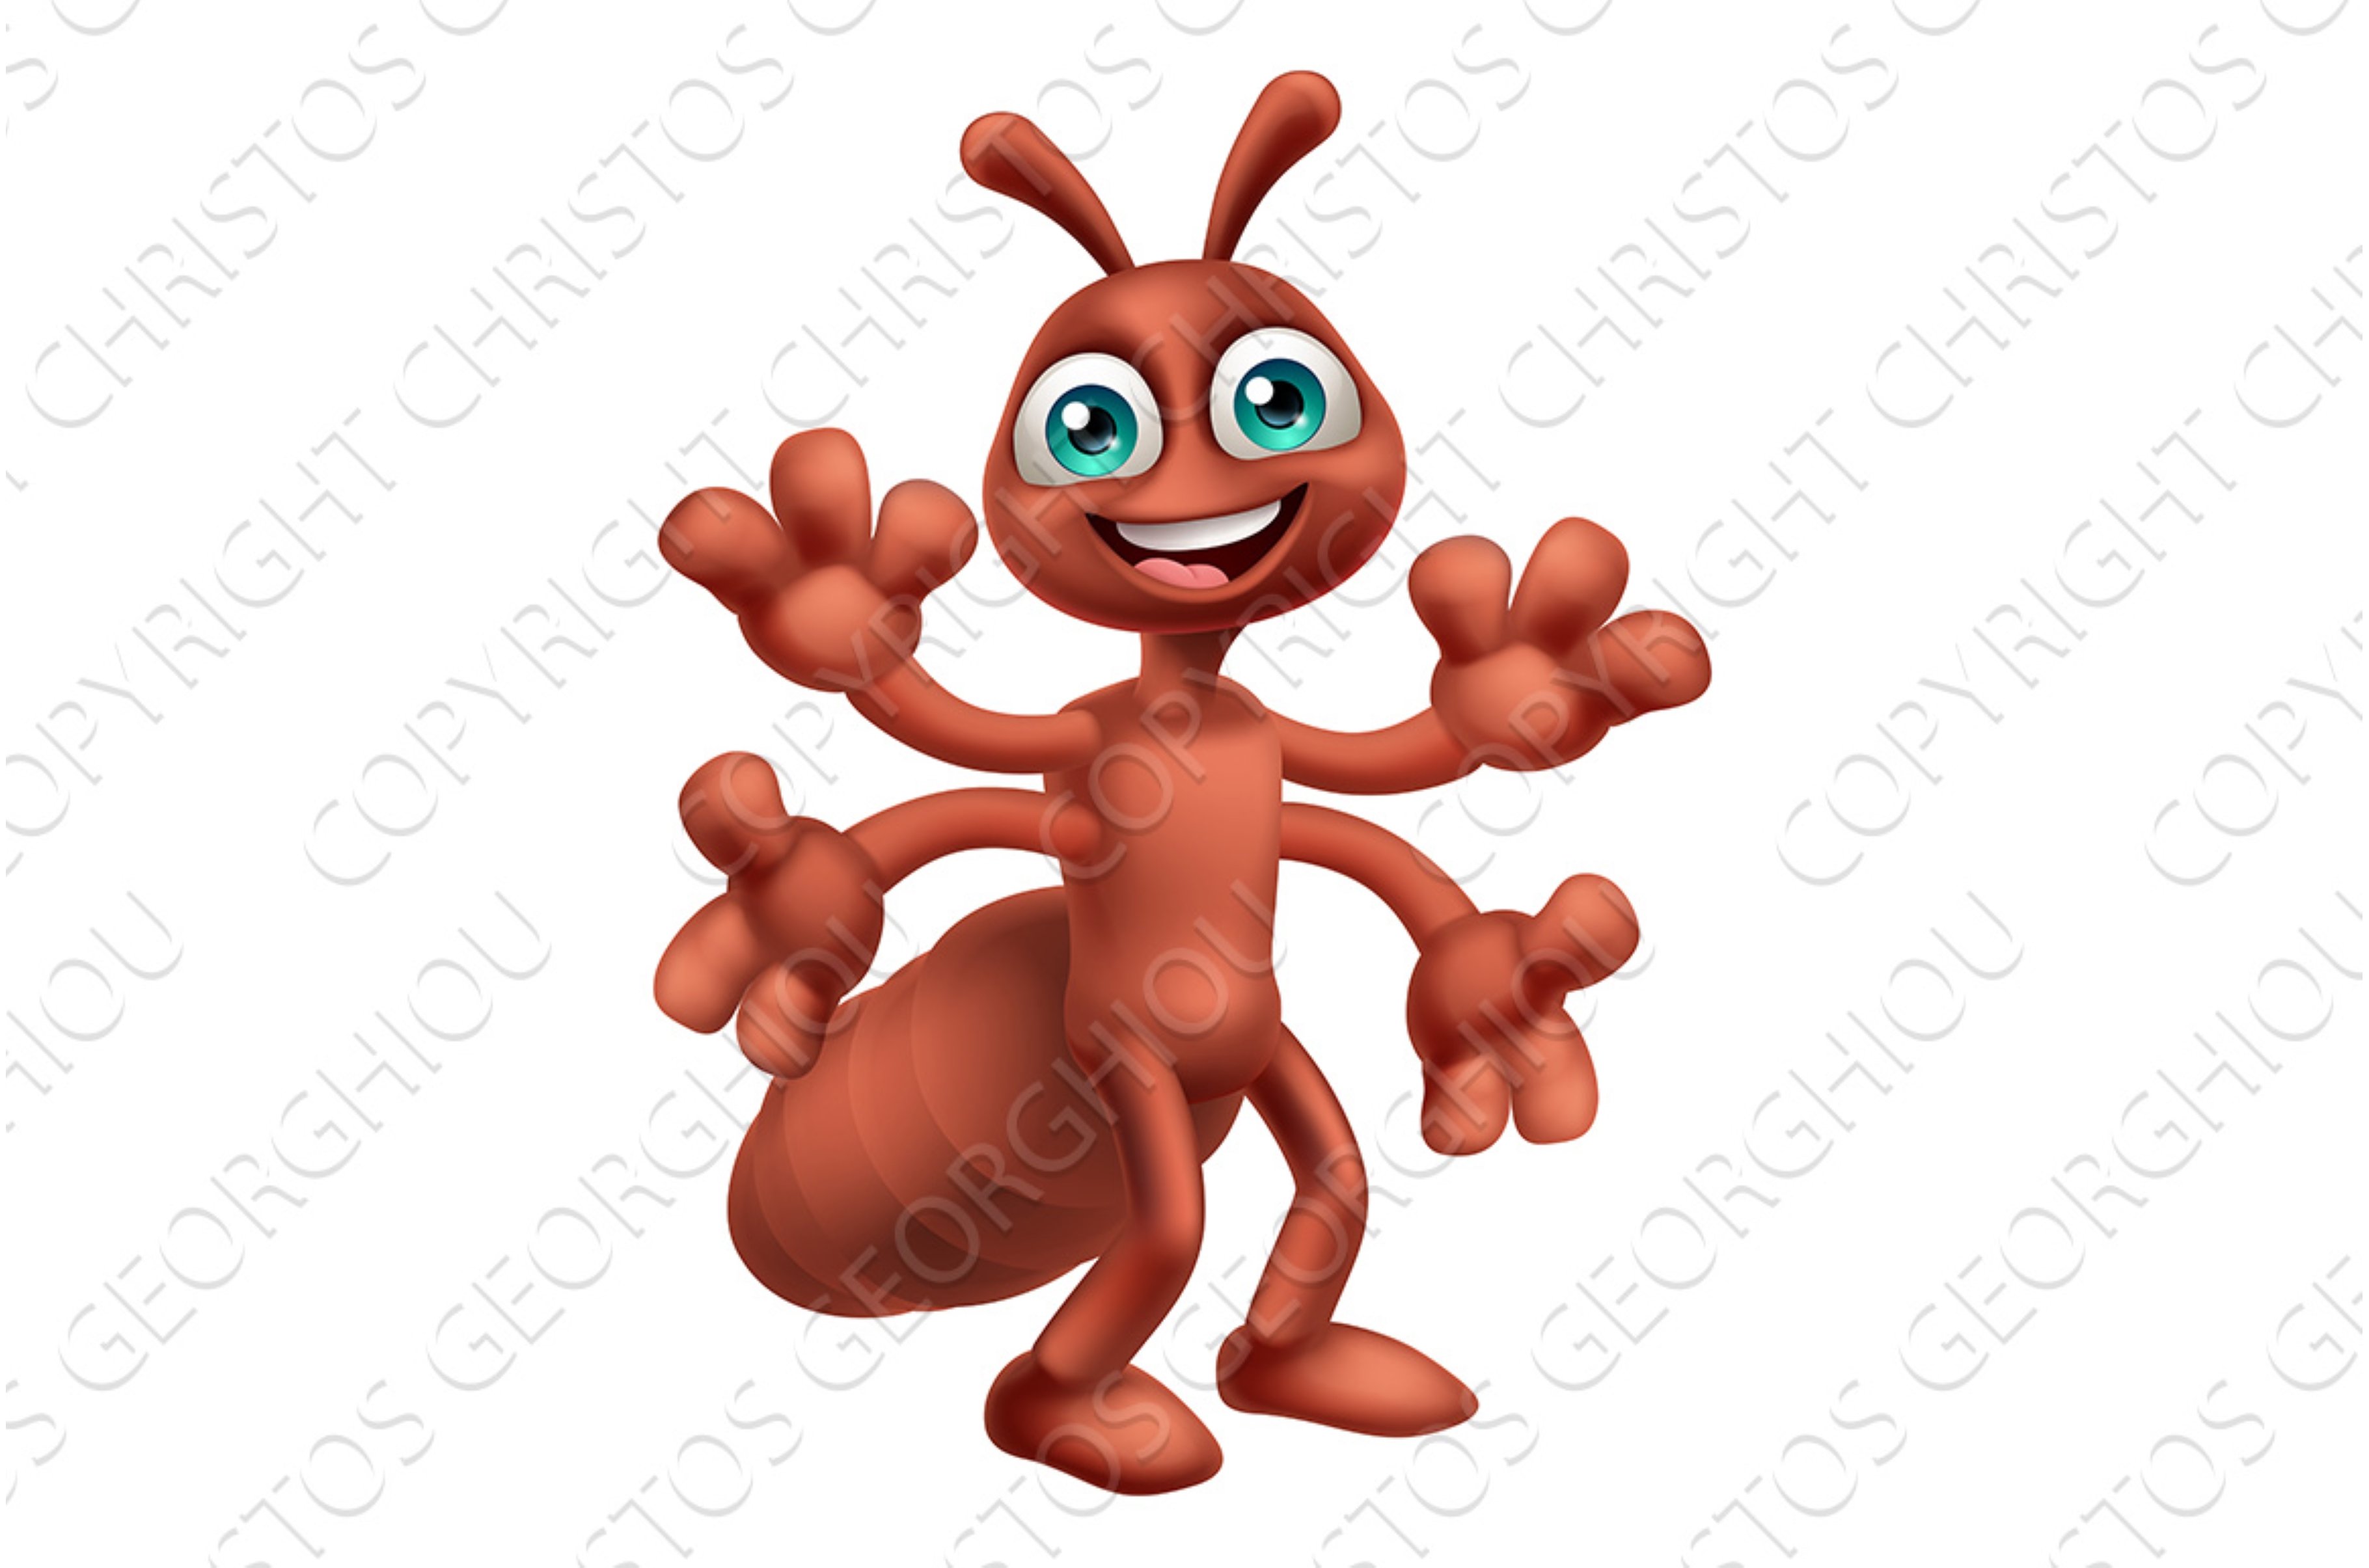 Ant Insect Bug Cute Cartoon cover image.